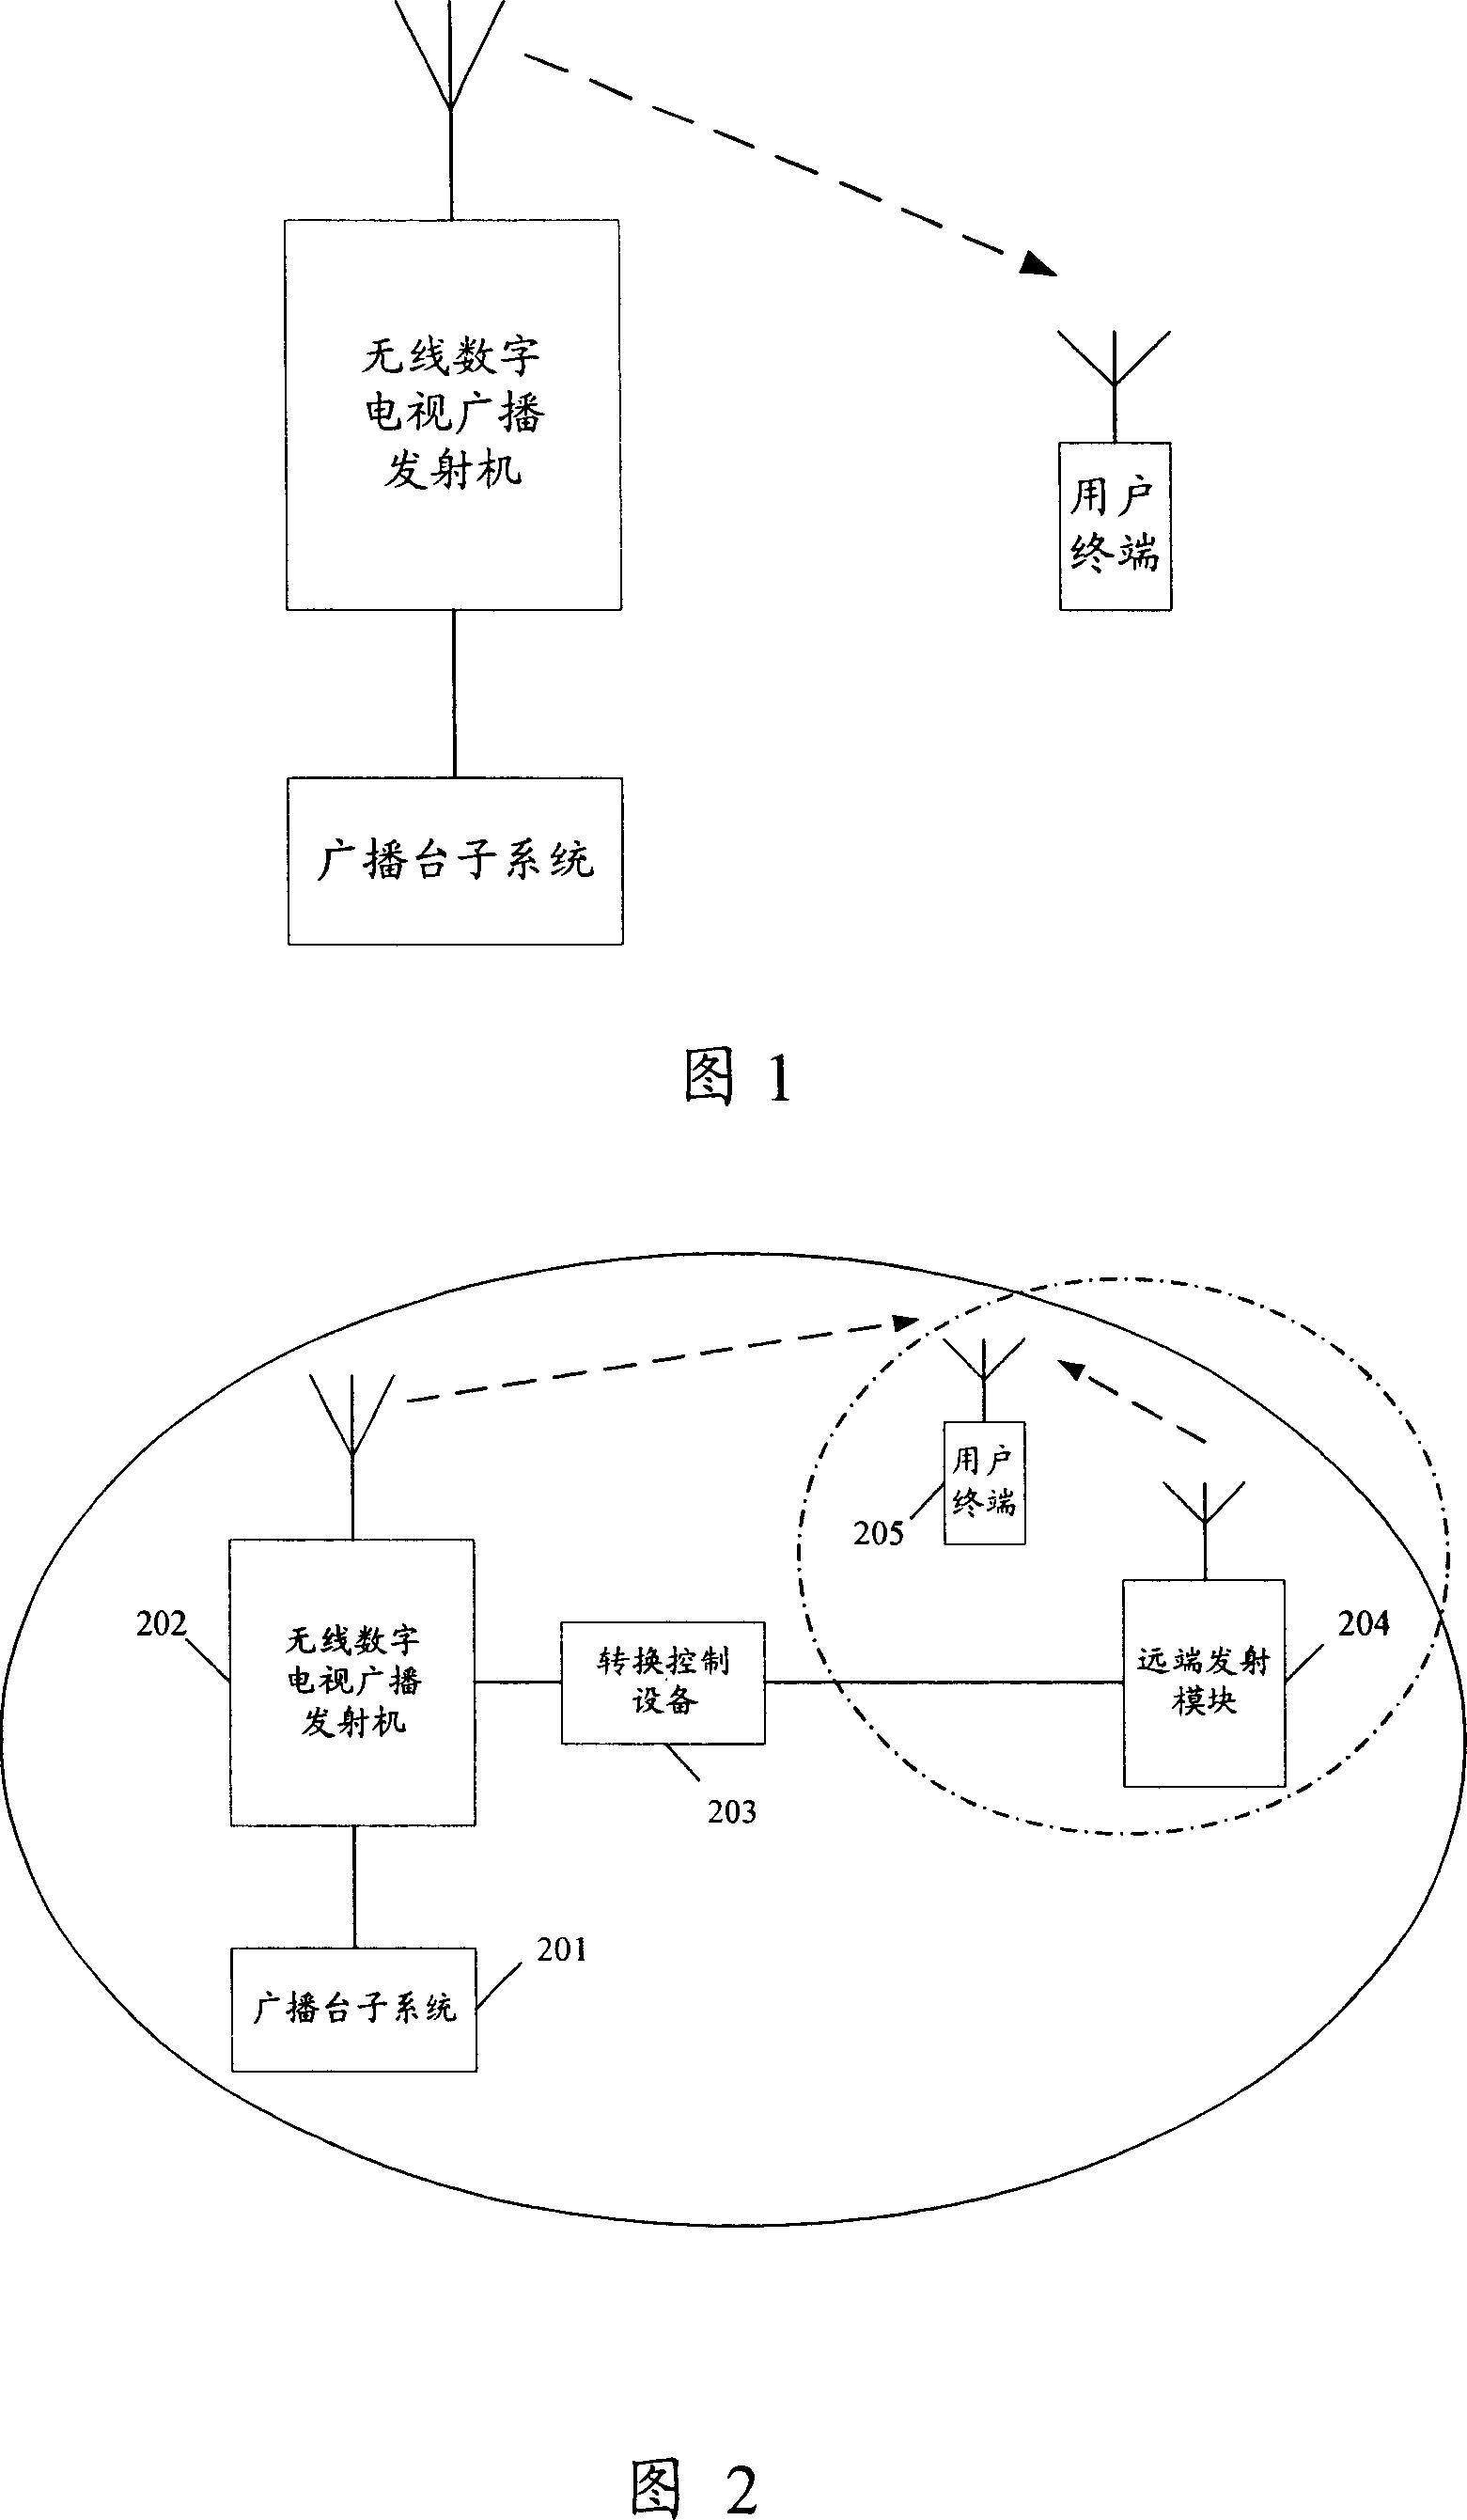 System and method for realizing wireless digital TV-set broadcast